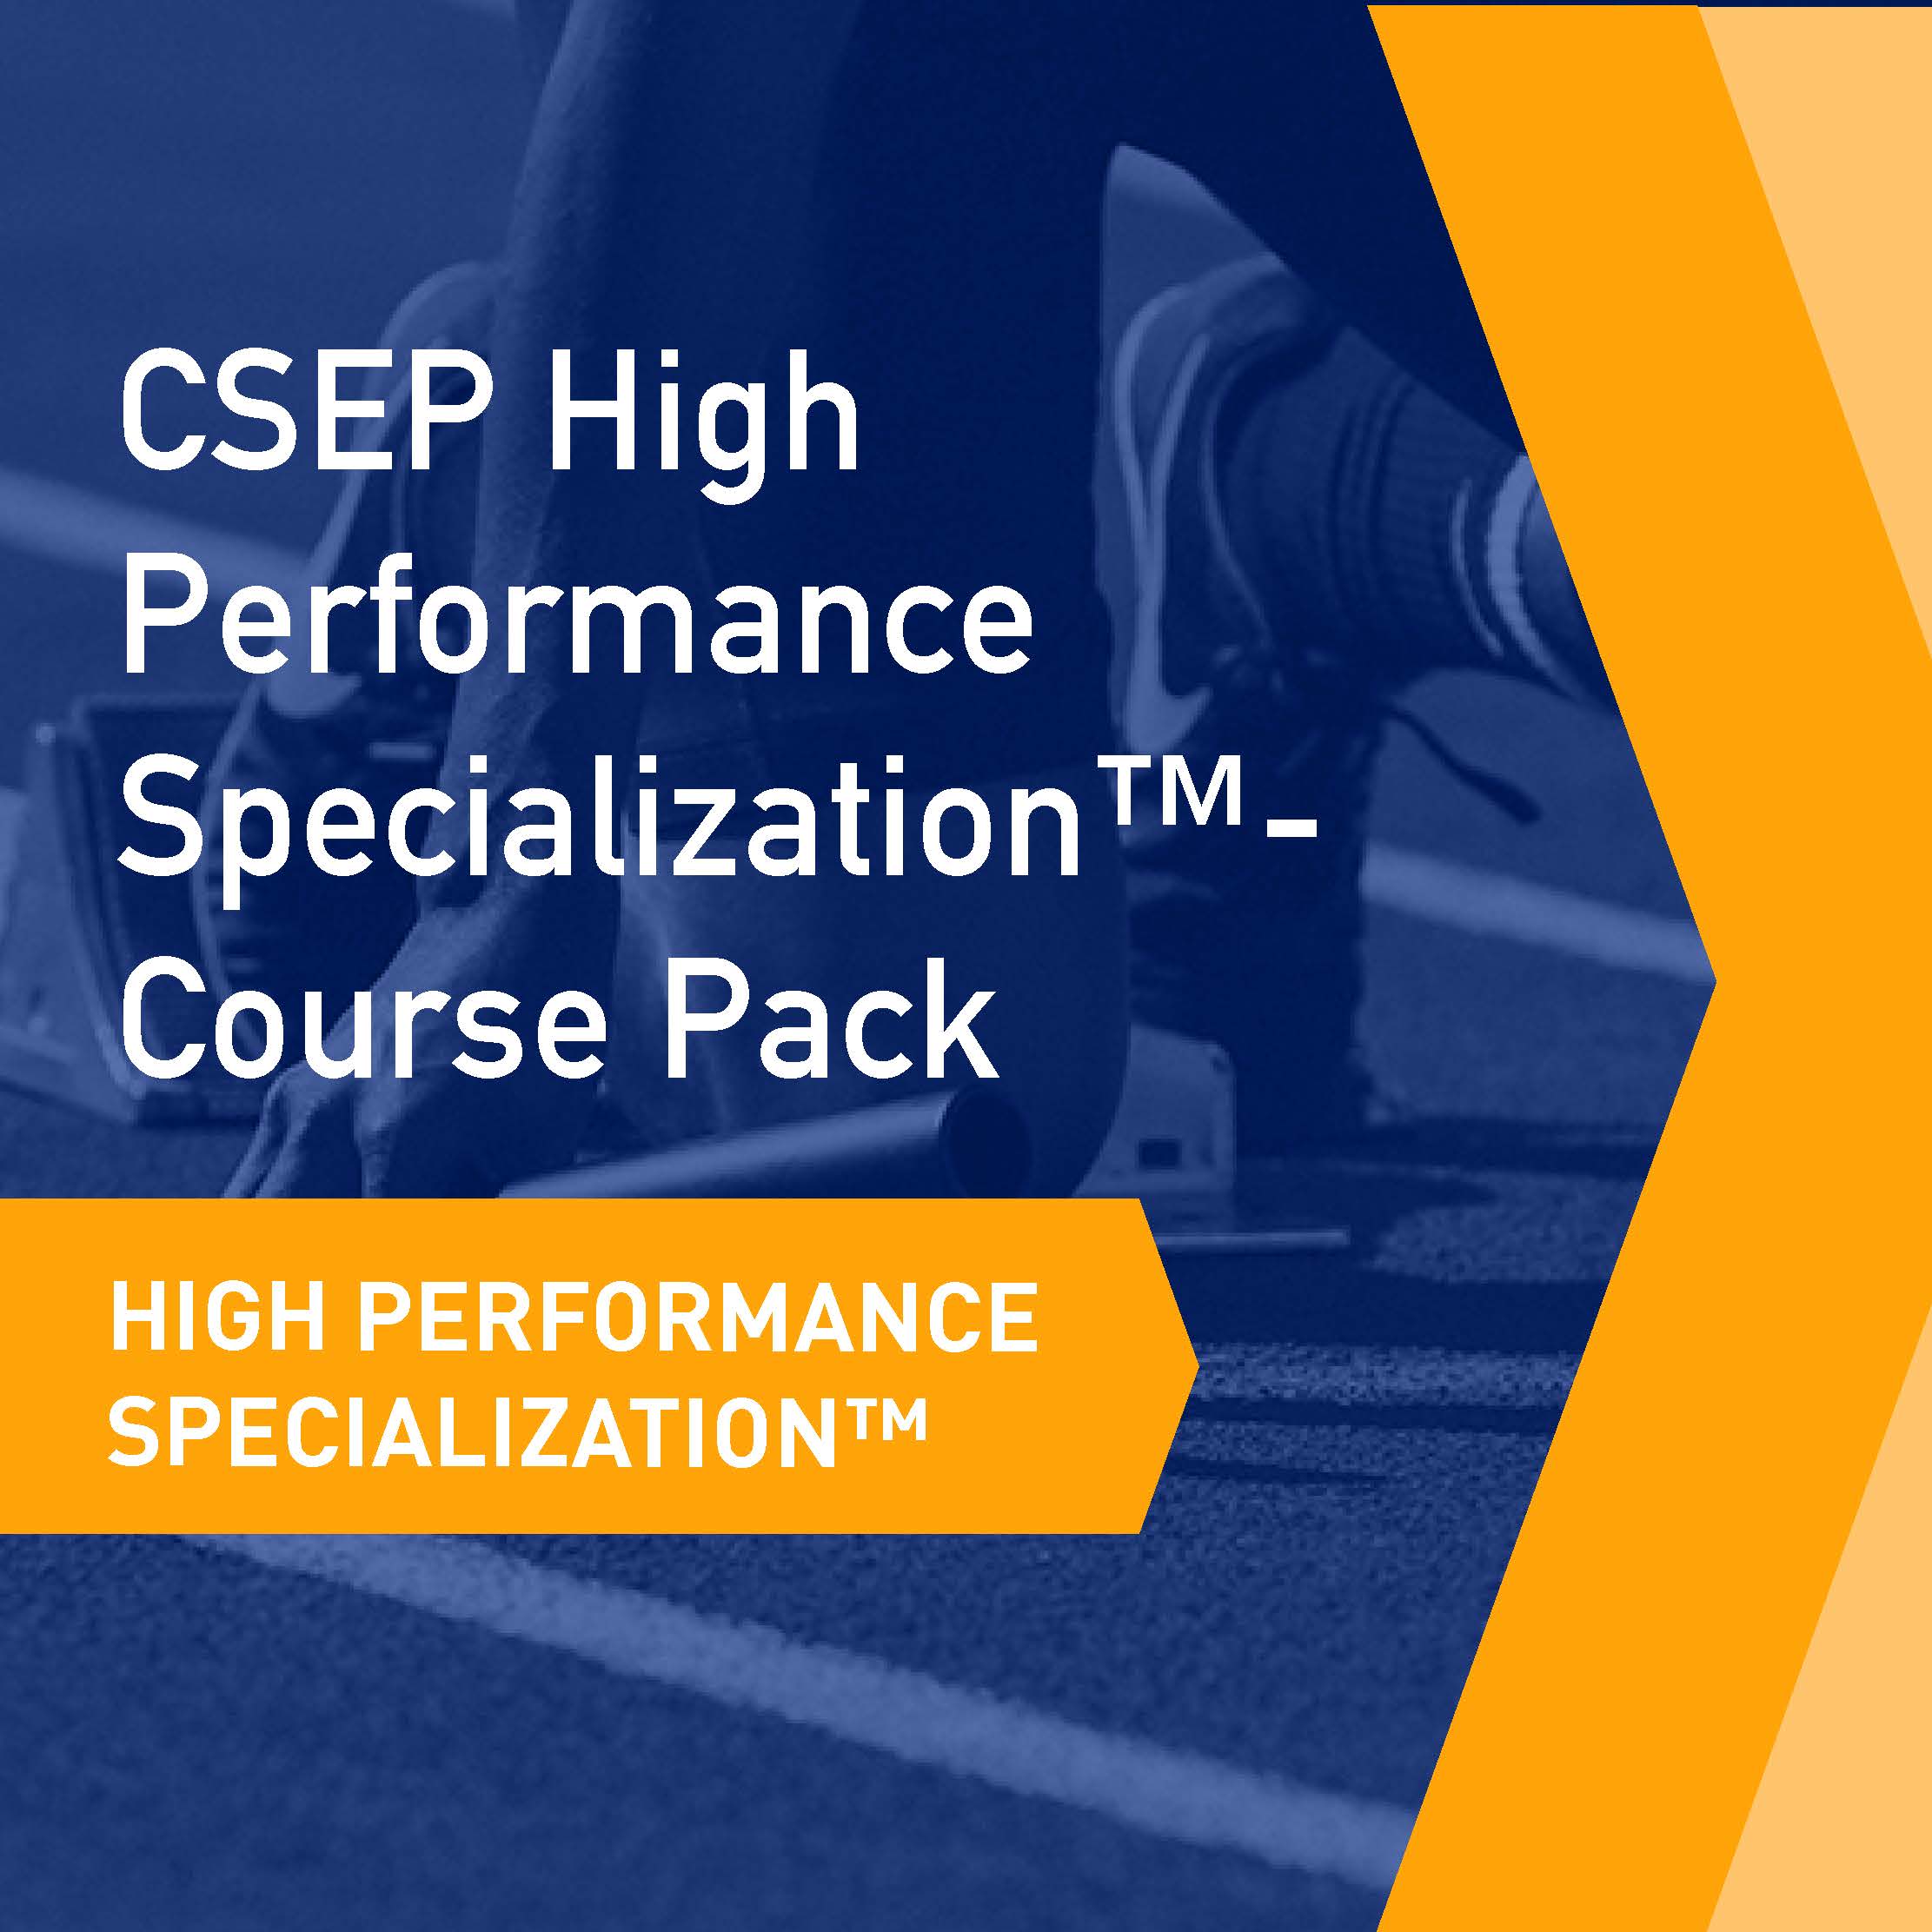 CSEP High Performance Specialization™ - Course Pack